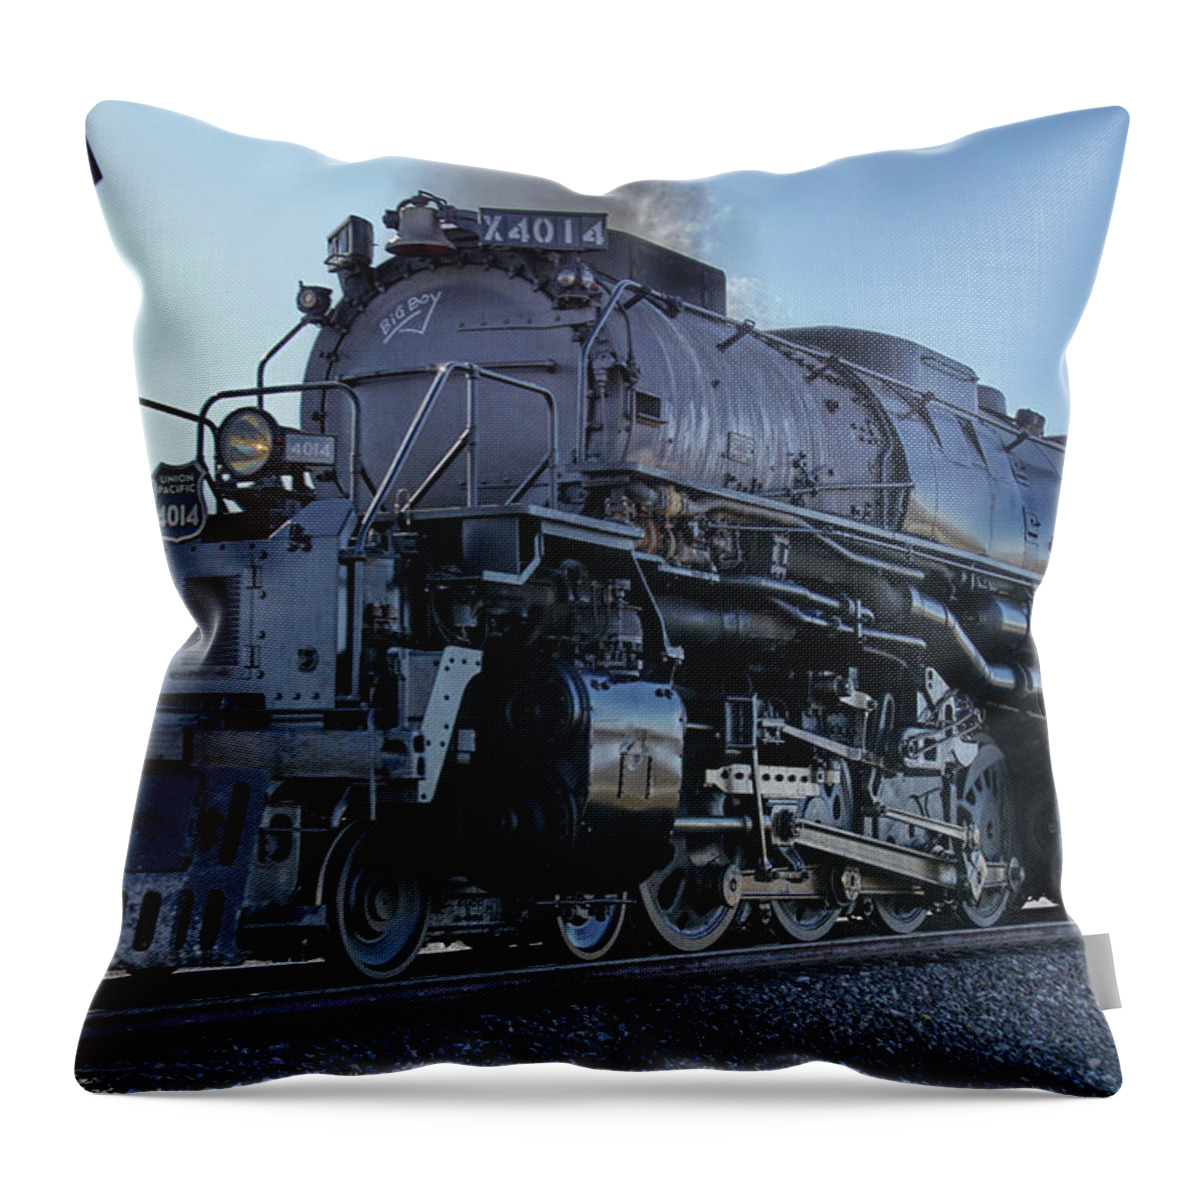 Steam Throw Pillow featuring the photograph Big Boy Steam Engine 4014 by Alan Hutchins